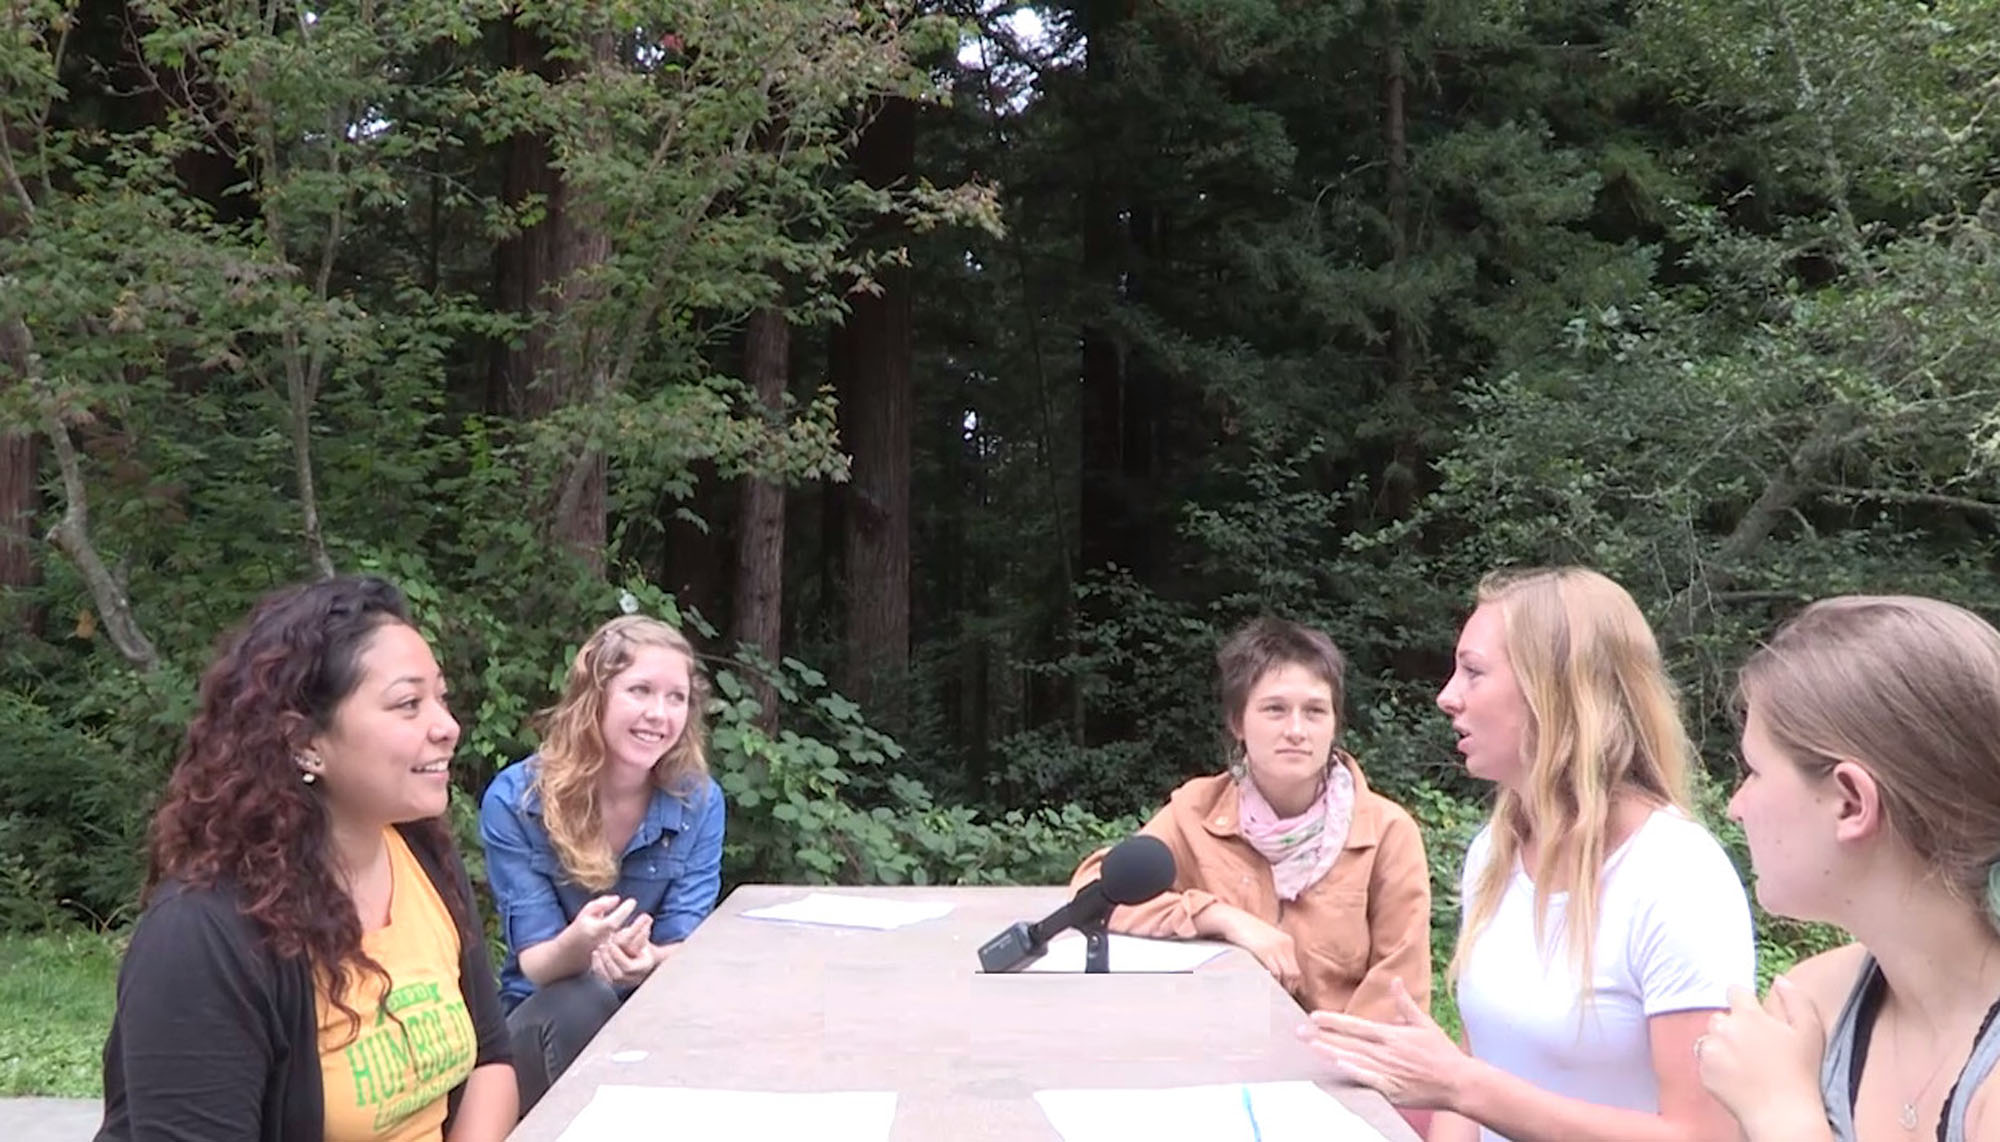 5 women sitting at a table outside speaking into a microphone with a forest in the background